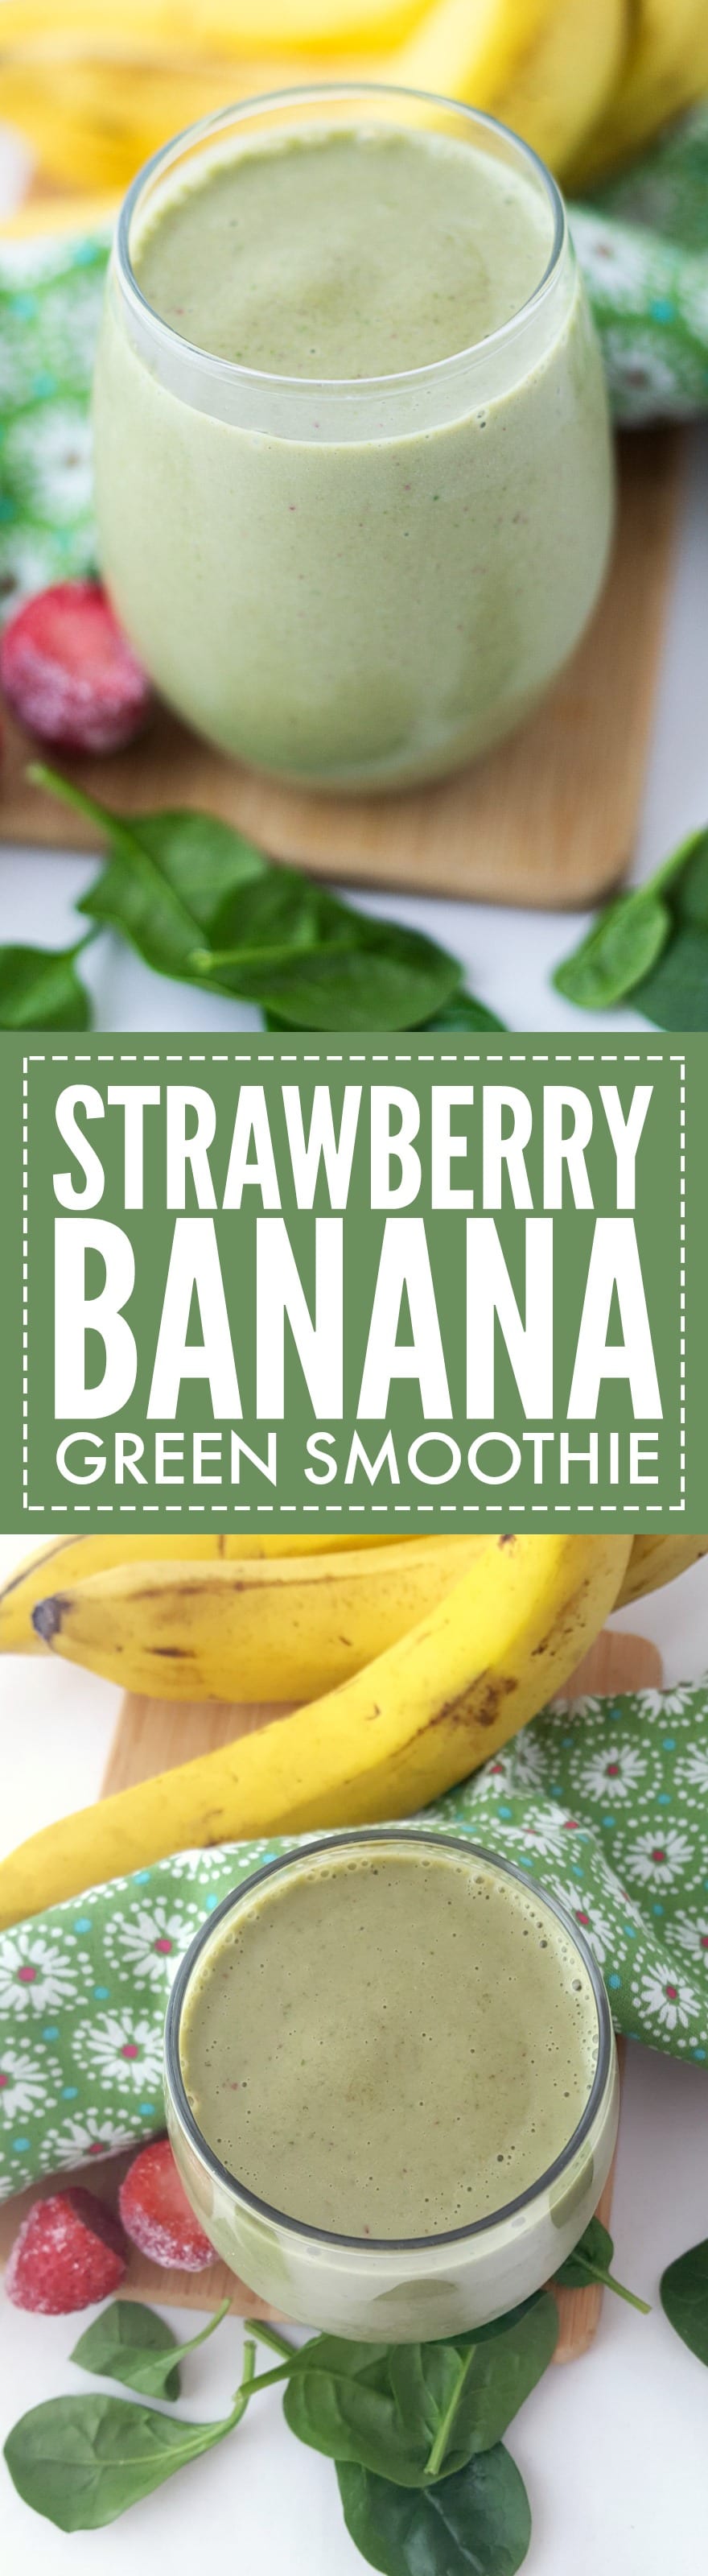 Our Strawberry Banana Green Smoothie is sweet and delicious. If you've never been a fan of green smoothies before, this one will change your mind!